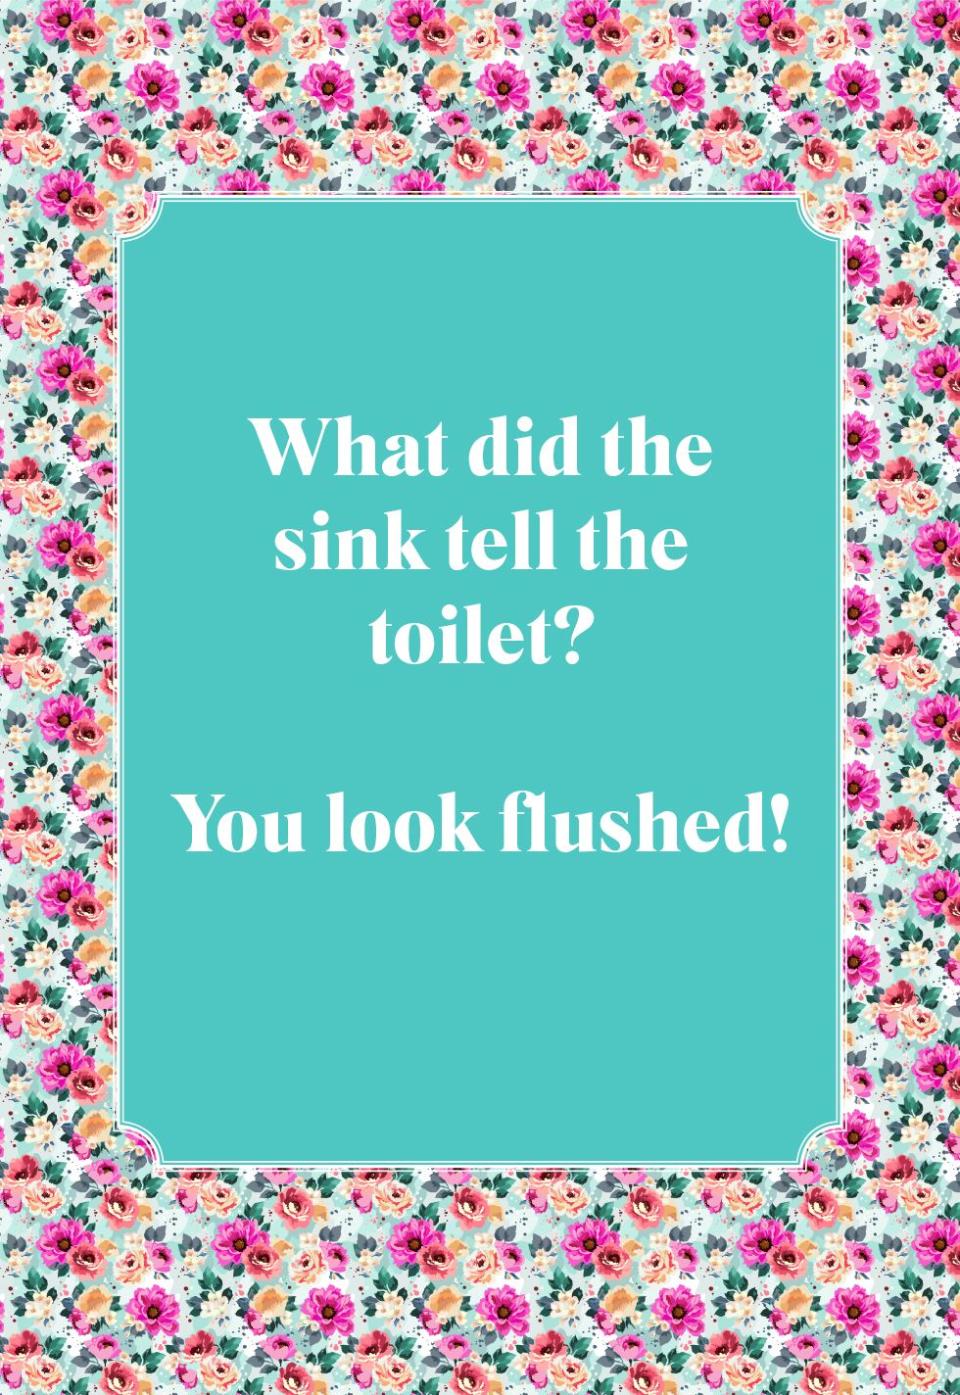 What did the sink tell the toilet?